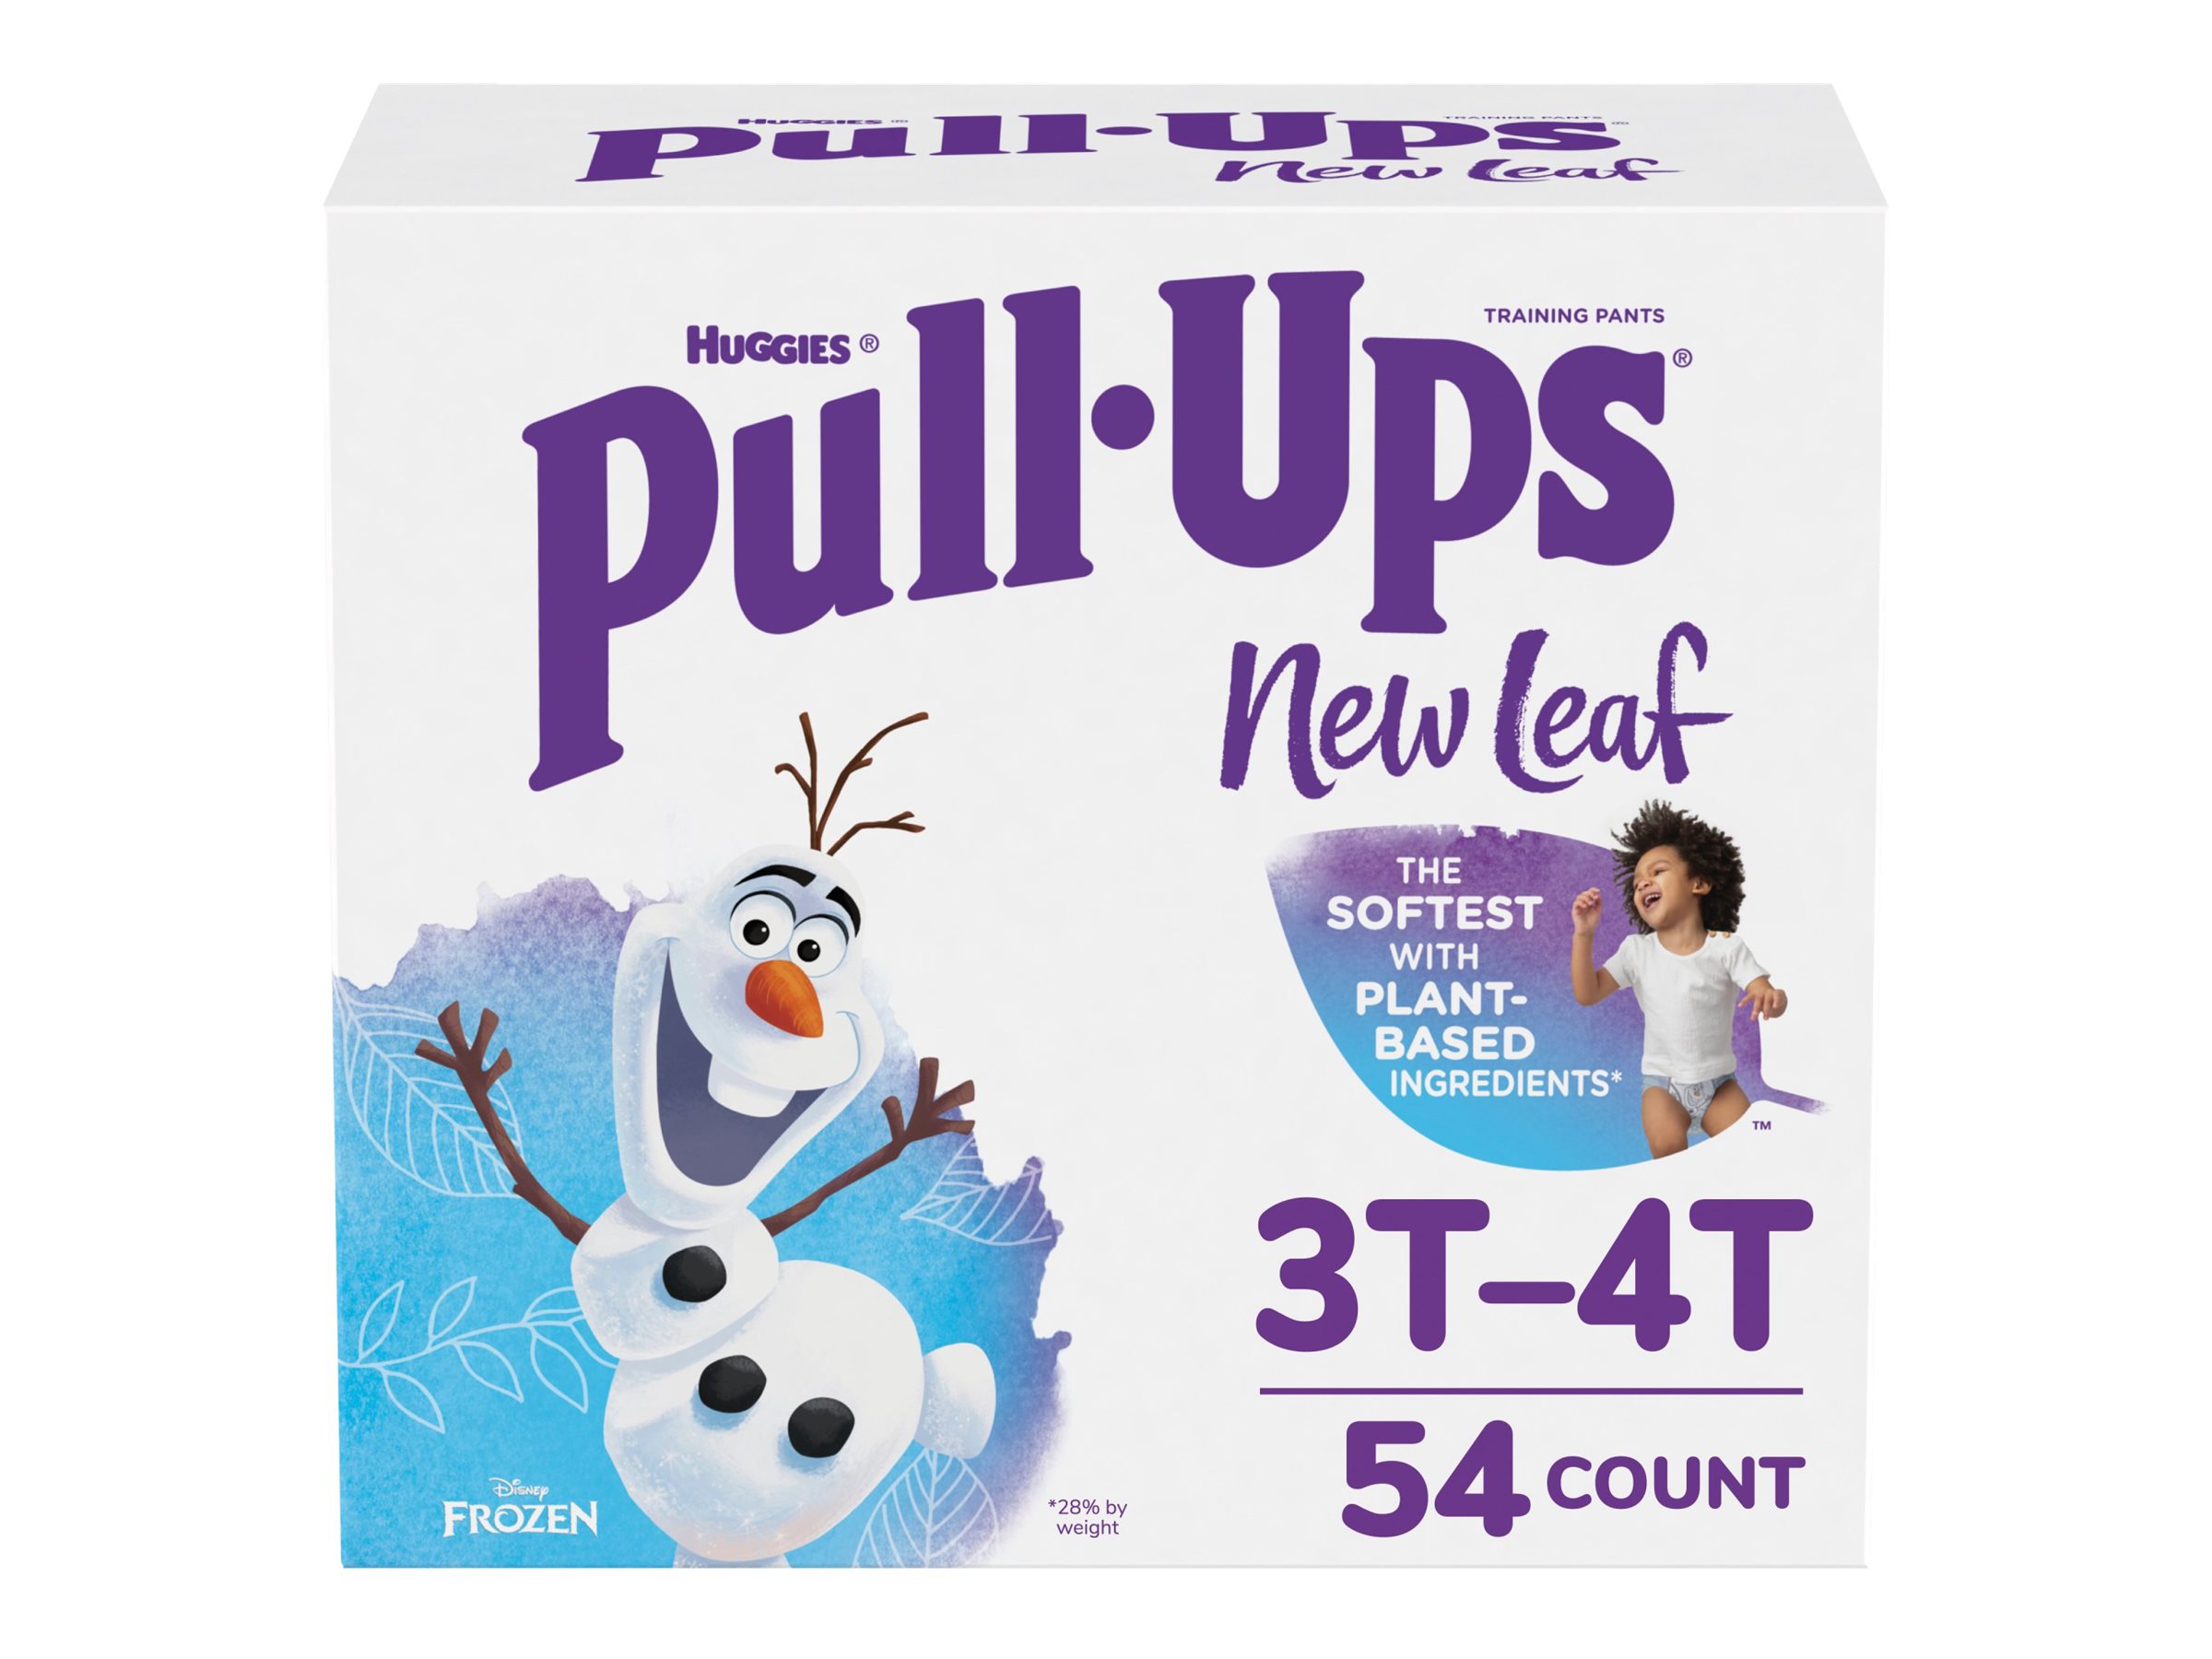 Pull-Ups® - Pull-Ups® New Leaf™ has arrived! Featuring Frozen 2